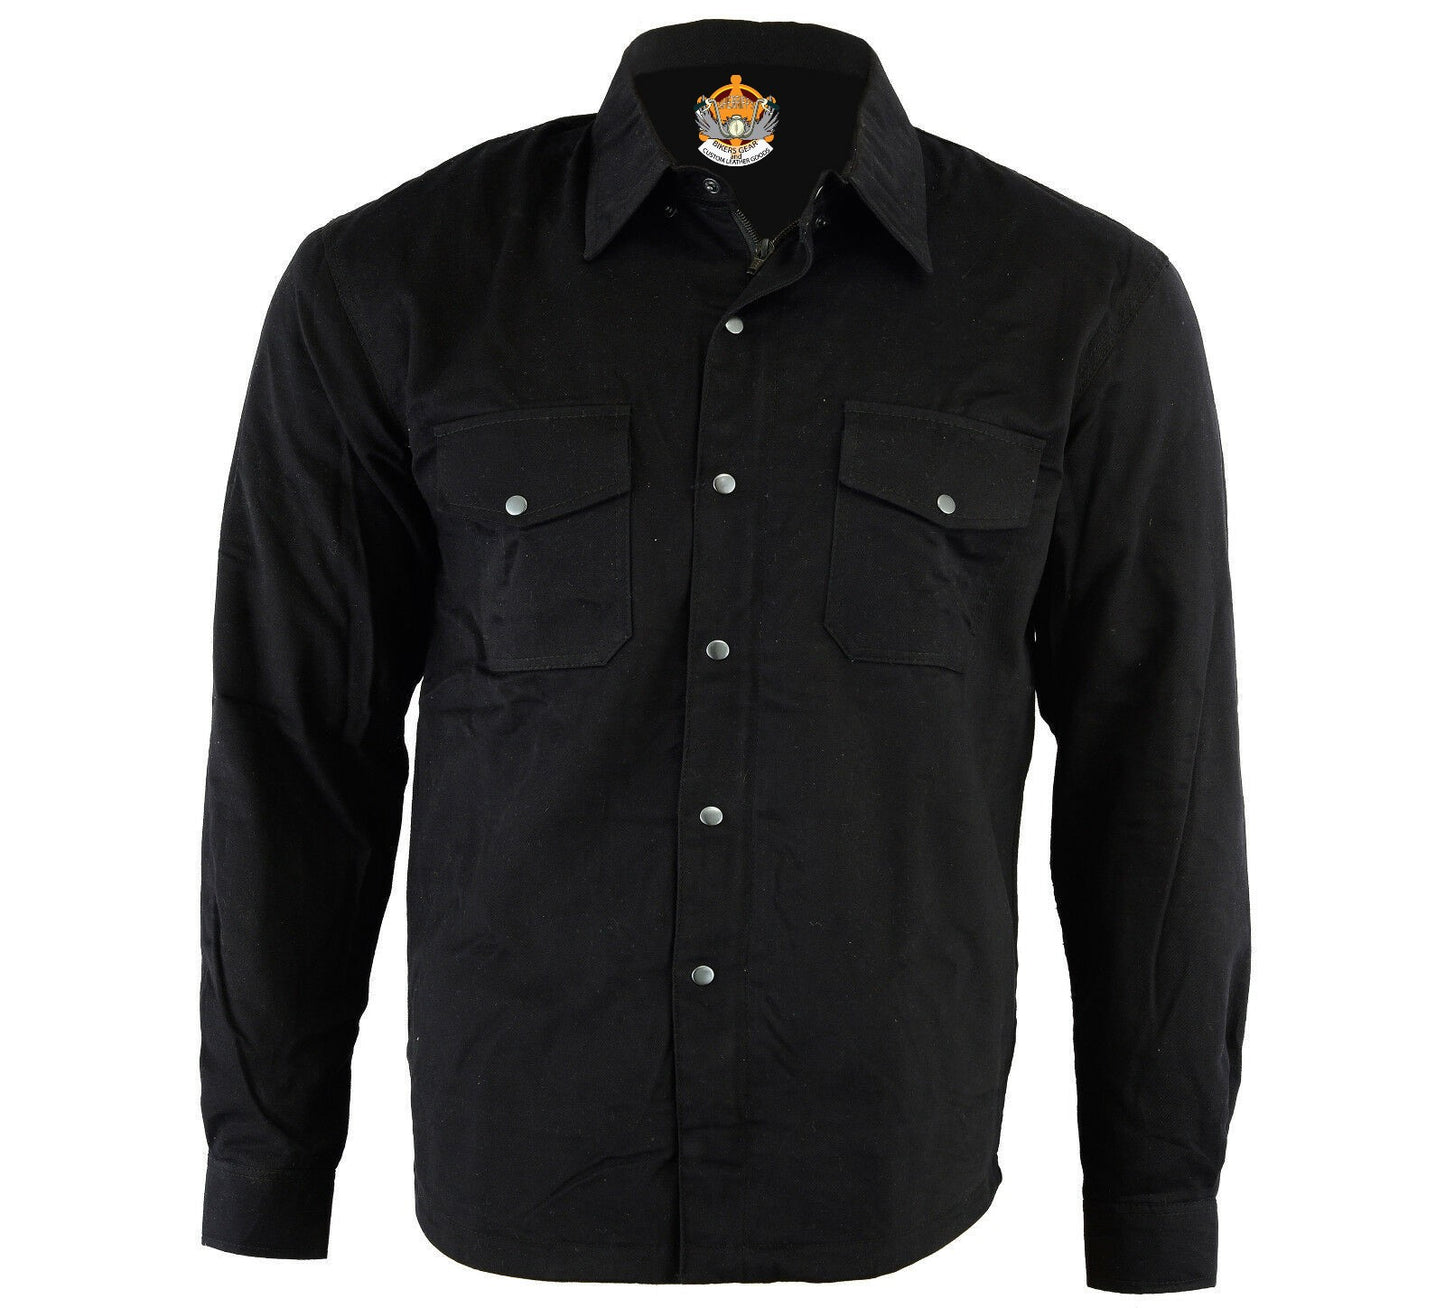 Flannel Shirt with Kevlar Lining - Black